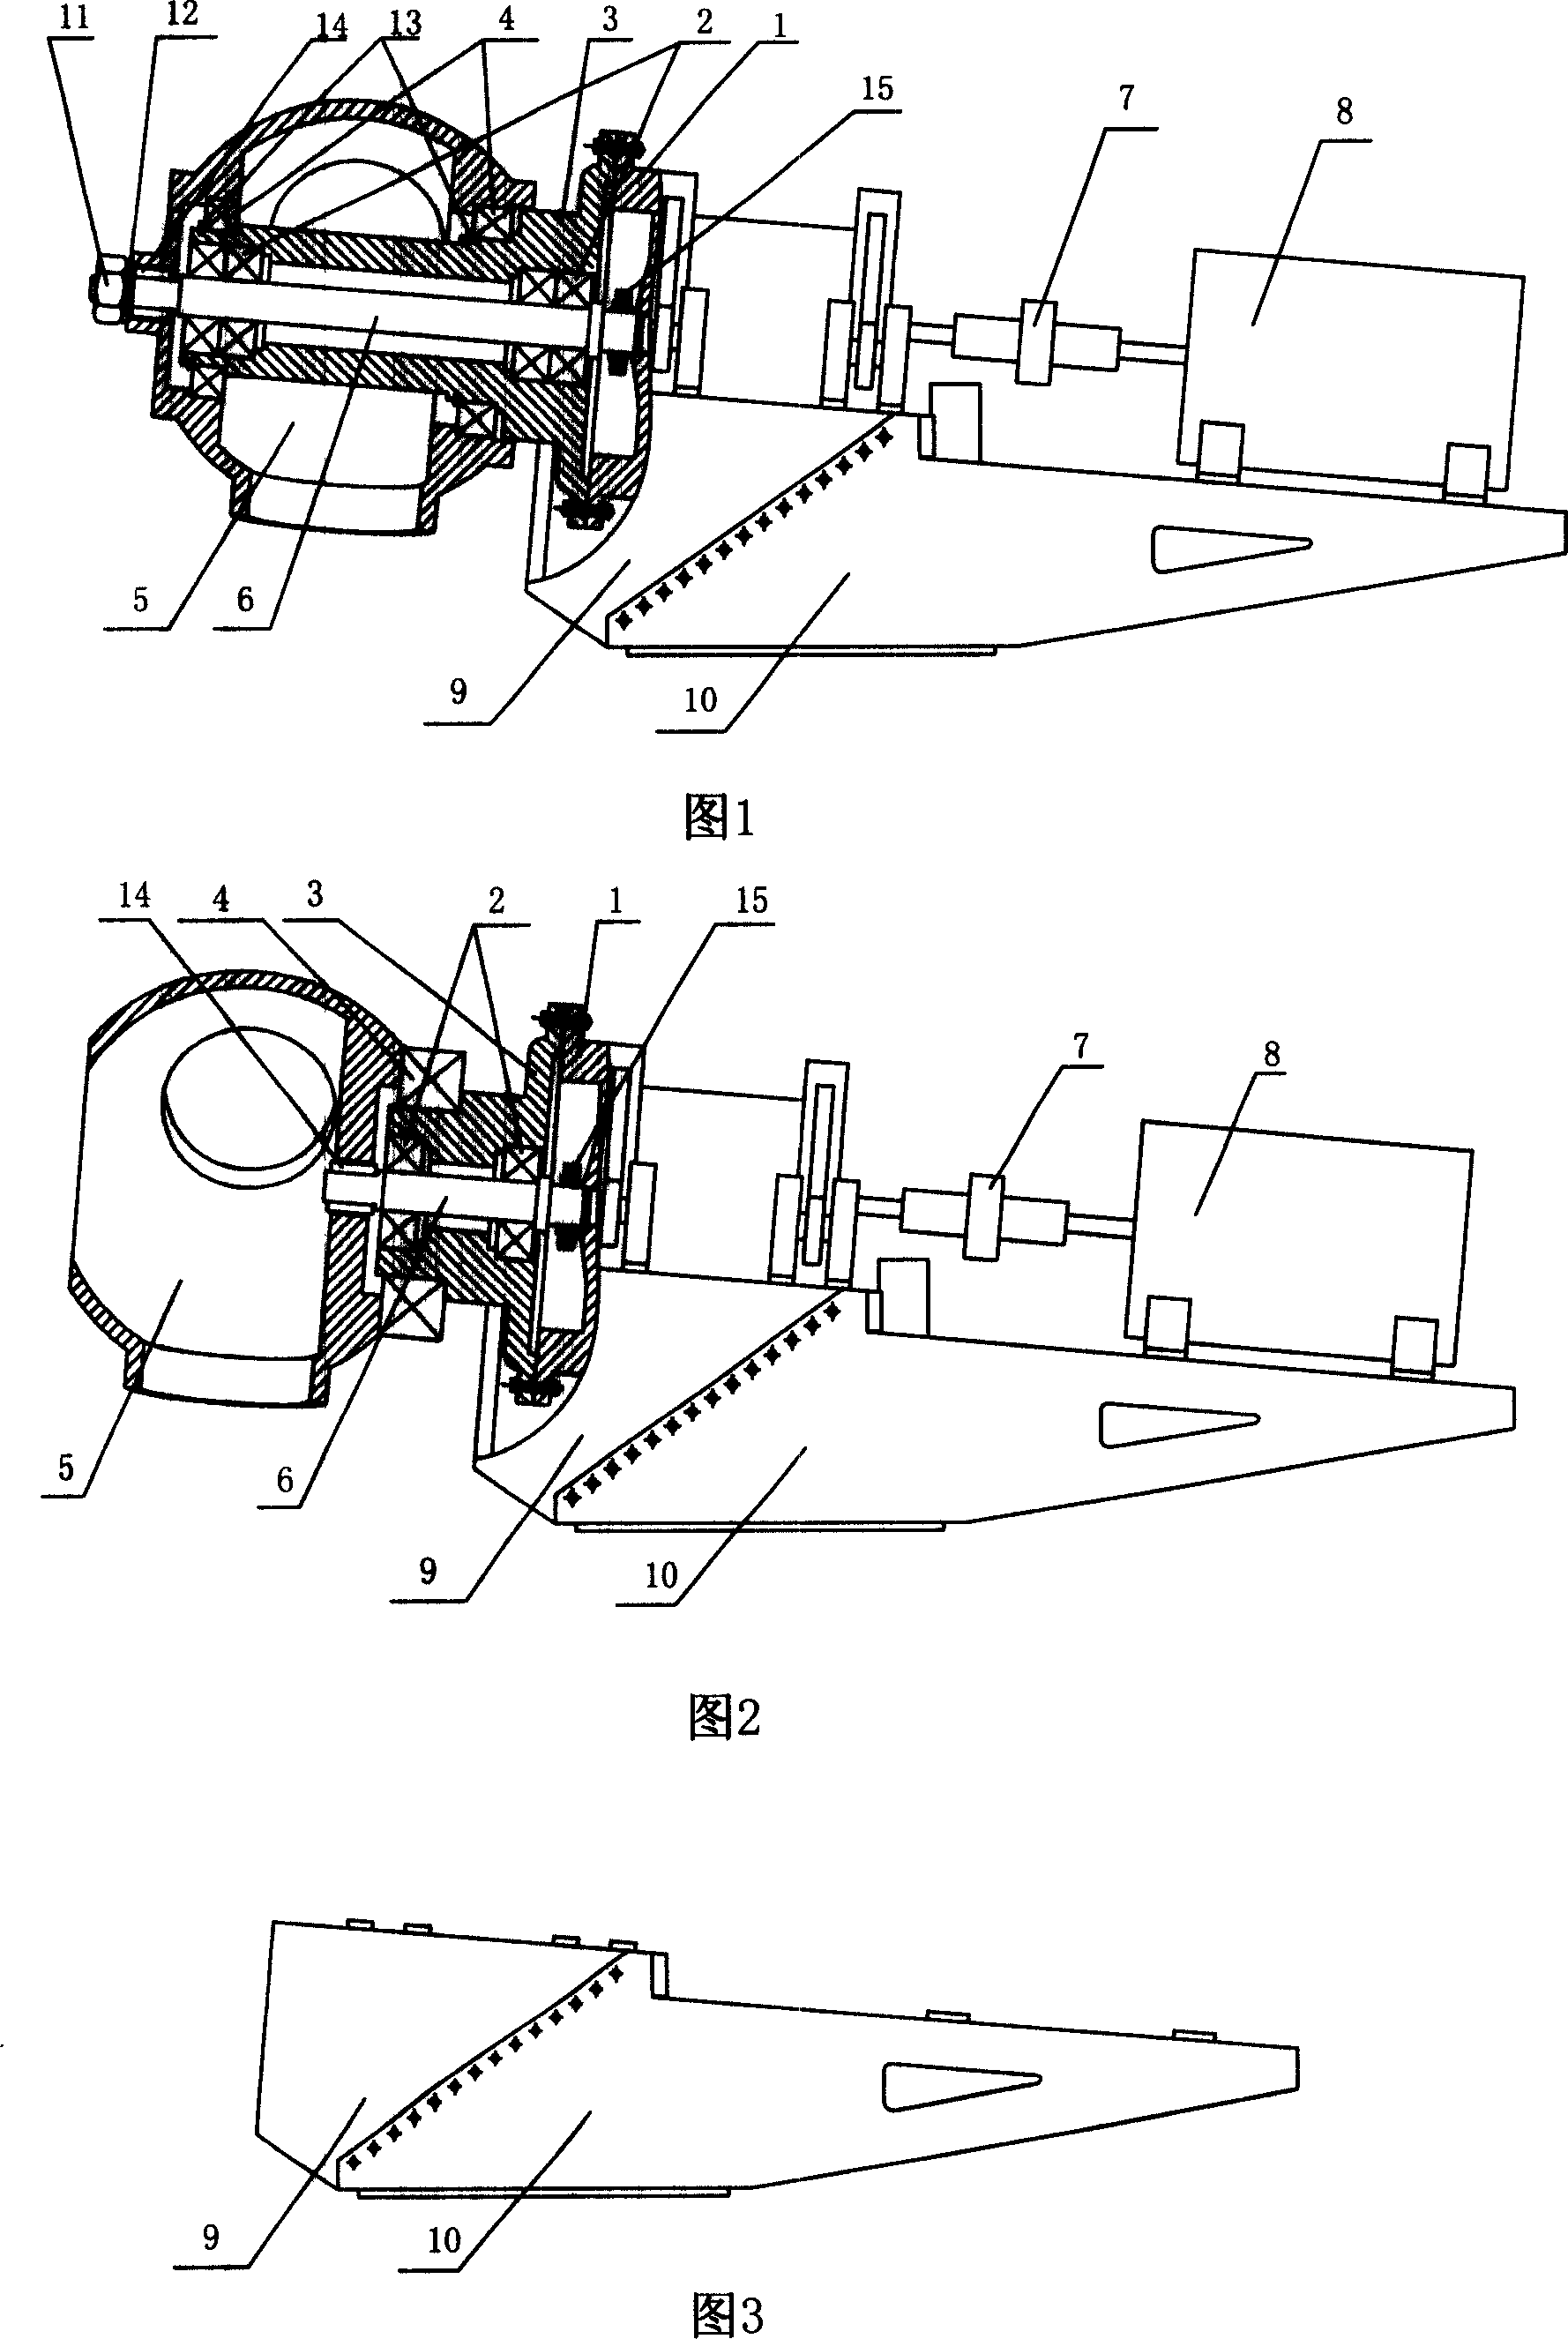 Double-feed type variable speed constant frequency wind turbine generator sets